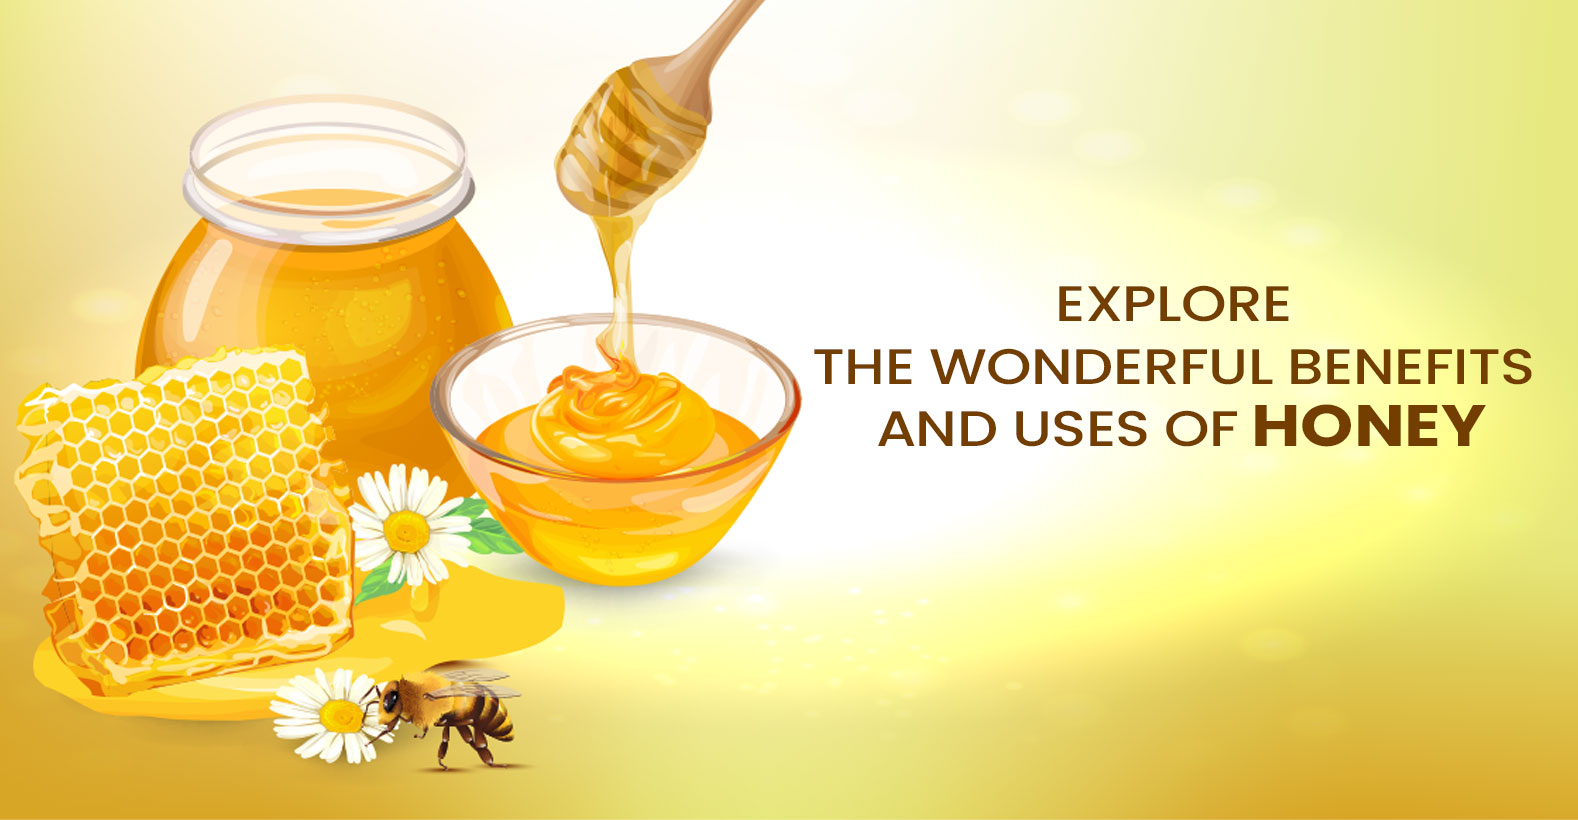 A Guide About Honey And Its Benefits